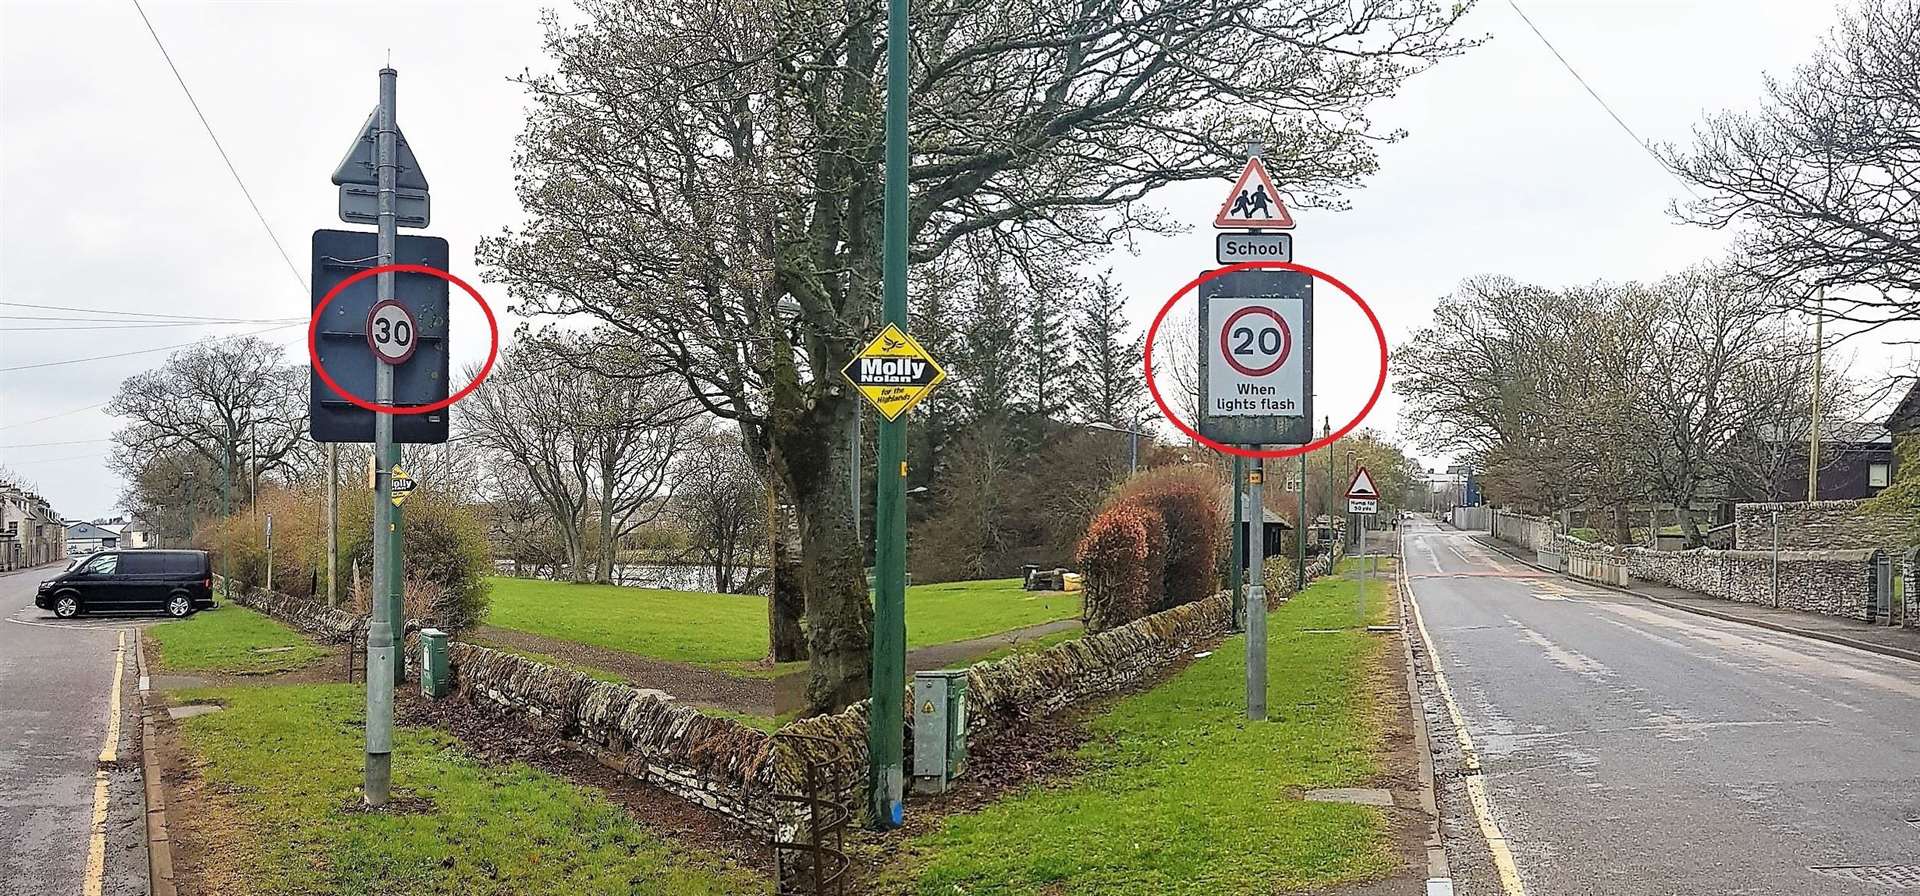 Composite image showing differing speed restrictions along the same street.